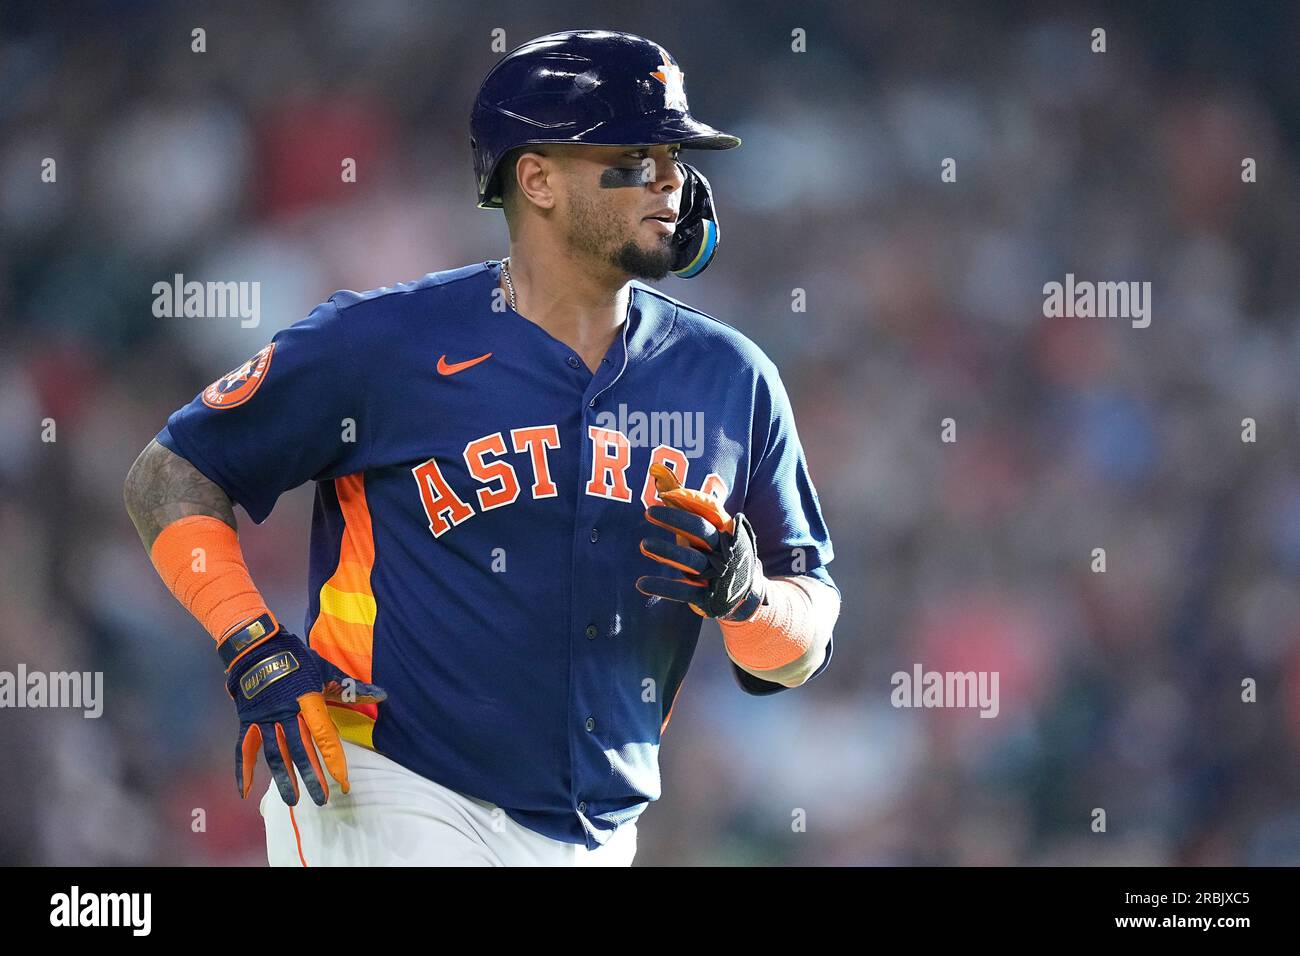 Houston Astros' Martin Maldonado after flying out during the